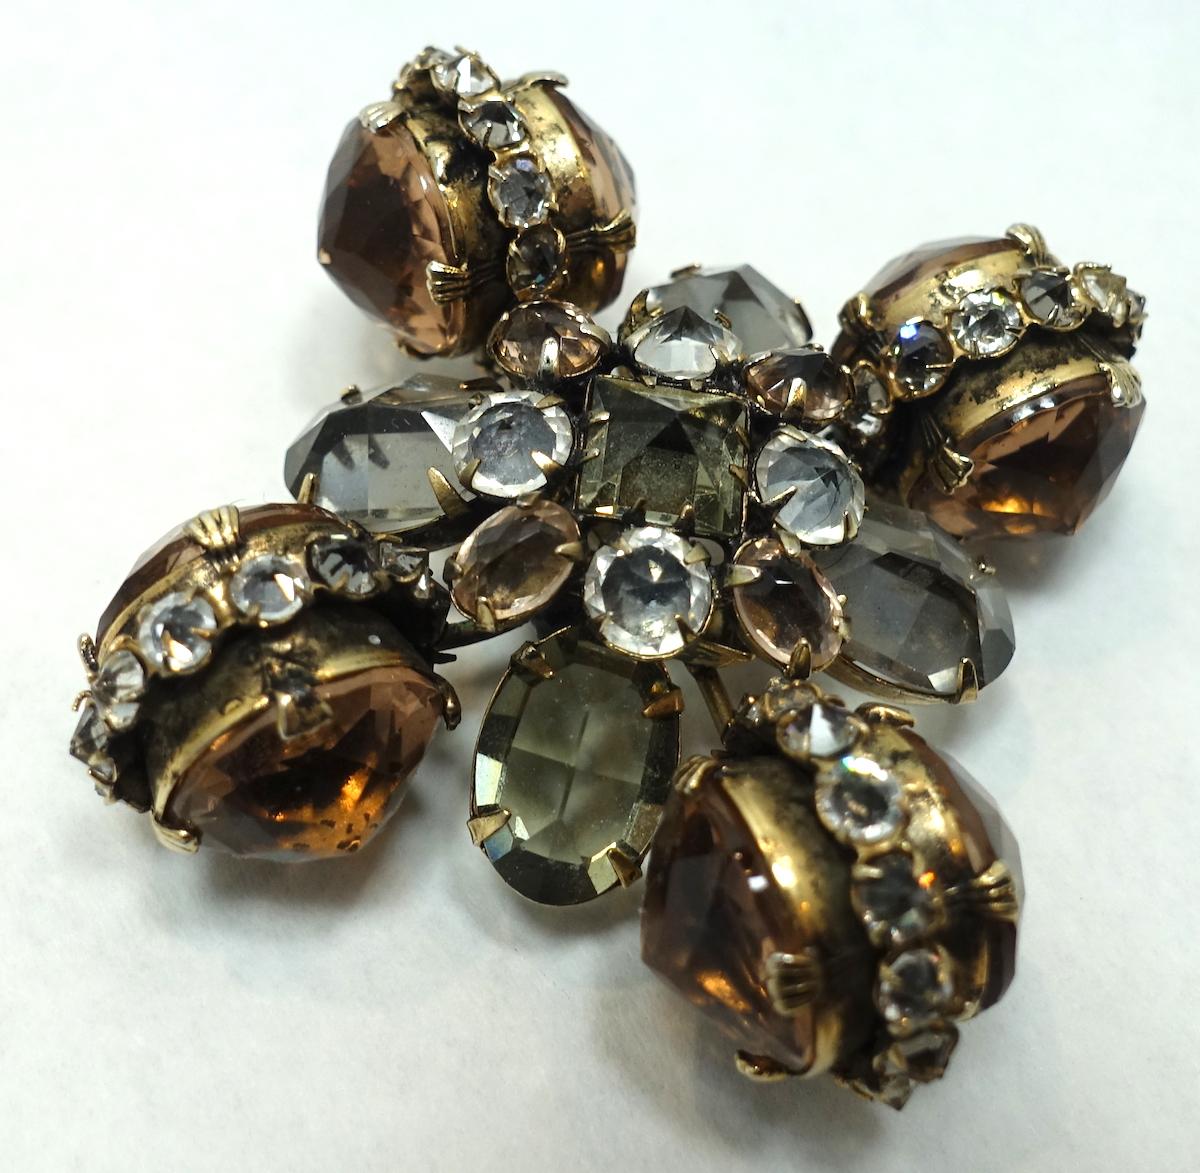 When I first saw this brooch, I thought it might be a Countess Cis … but it has no signature. This vintage brooch can also be worn as a pendant and features an ornate design with topaz, gray and clear color crystals in a gold tone setting.  This